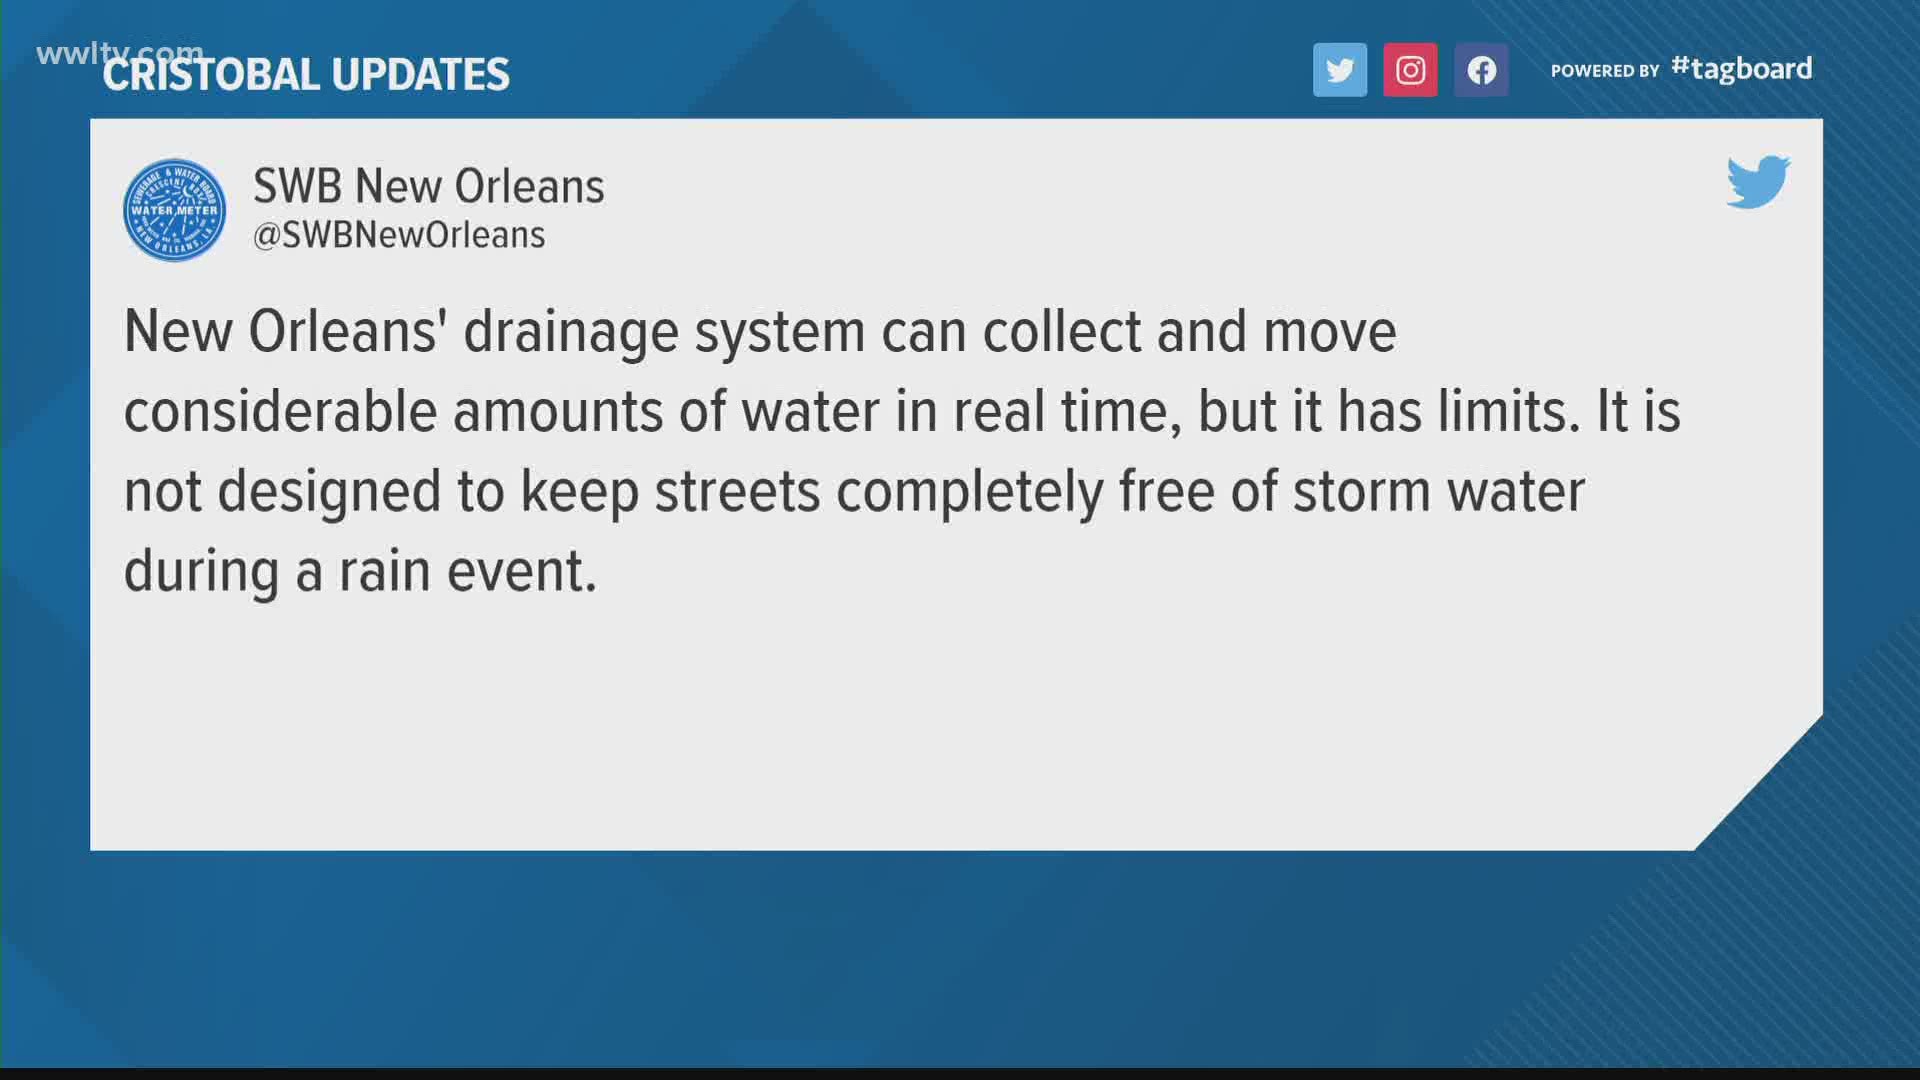 The warning from the S&WB seems to contradicts officials previous statements that the drainage system was prepared to handle Tropical Storm Cristobal.